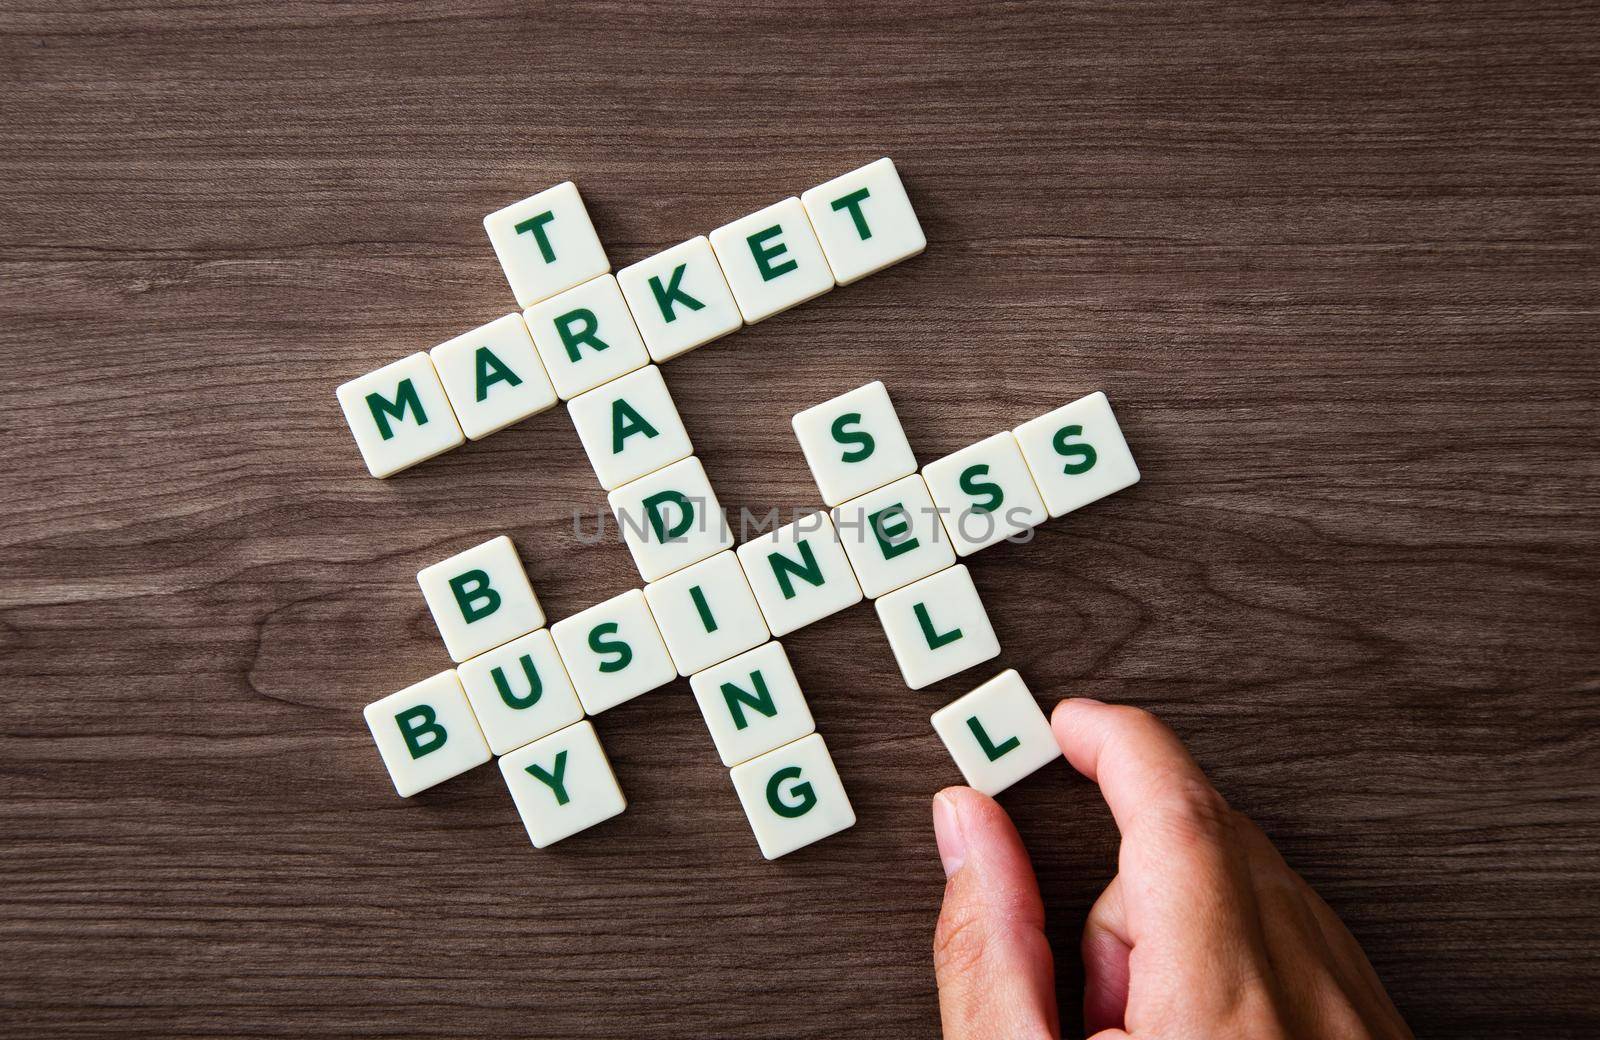 Words of business marketing collected in crossword with plastic cubes